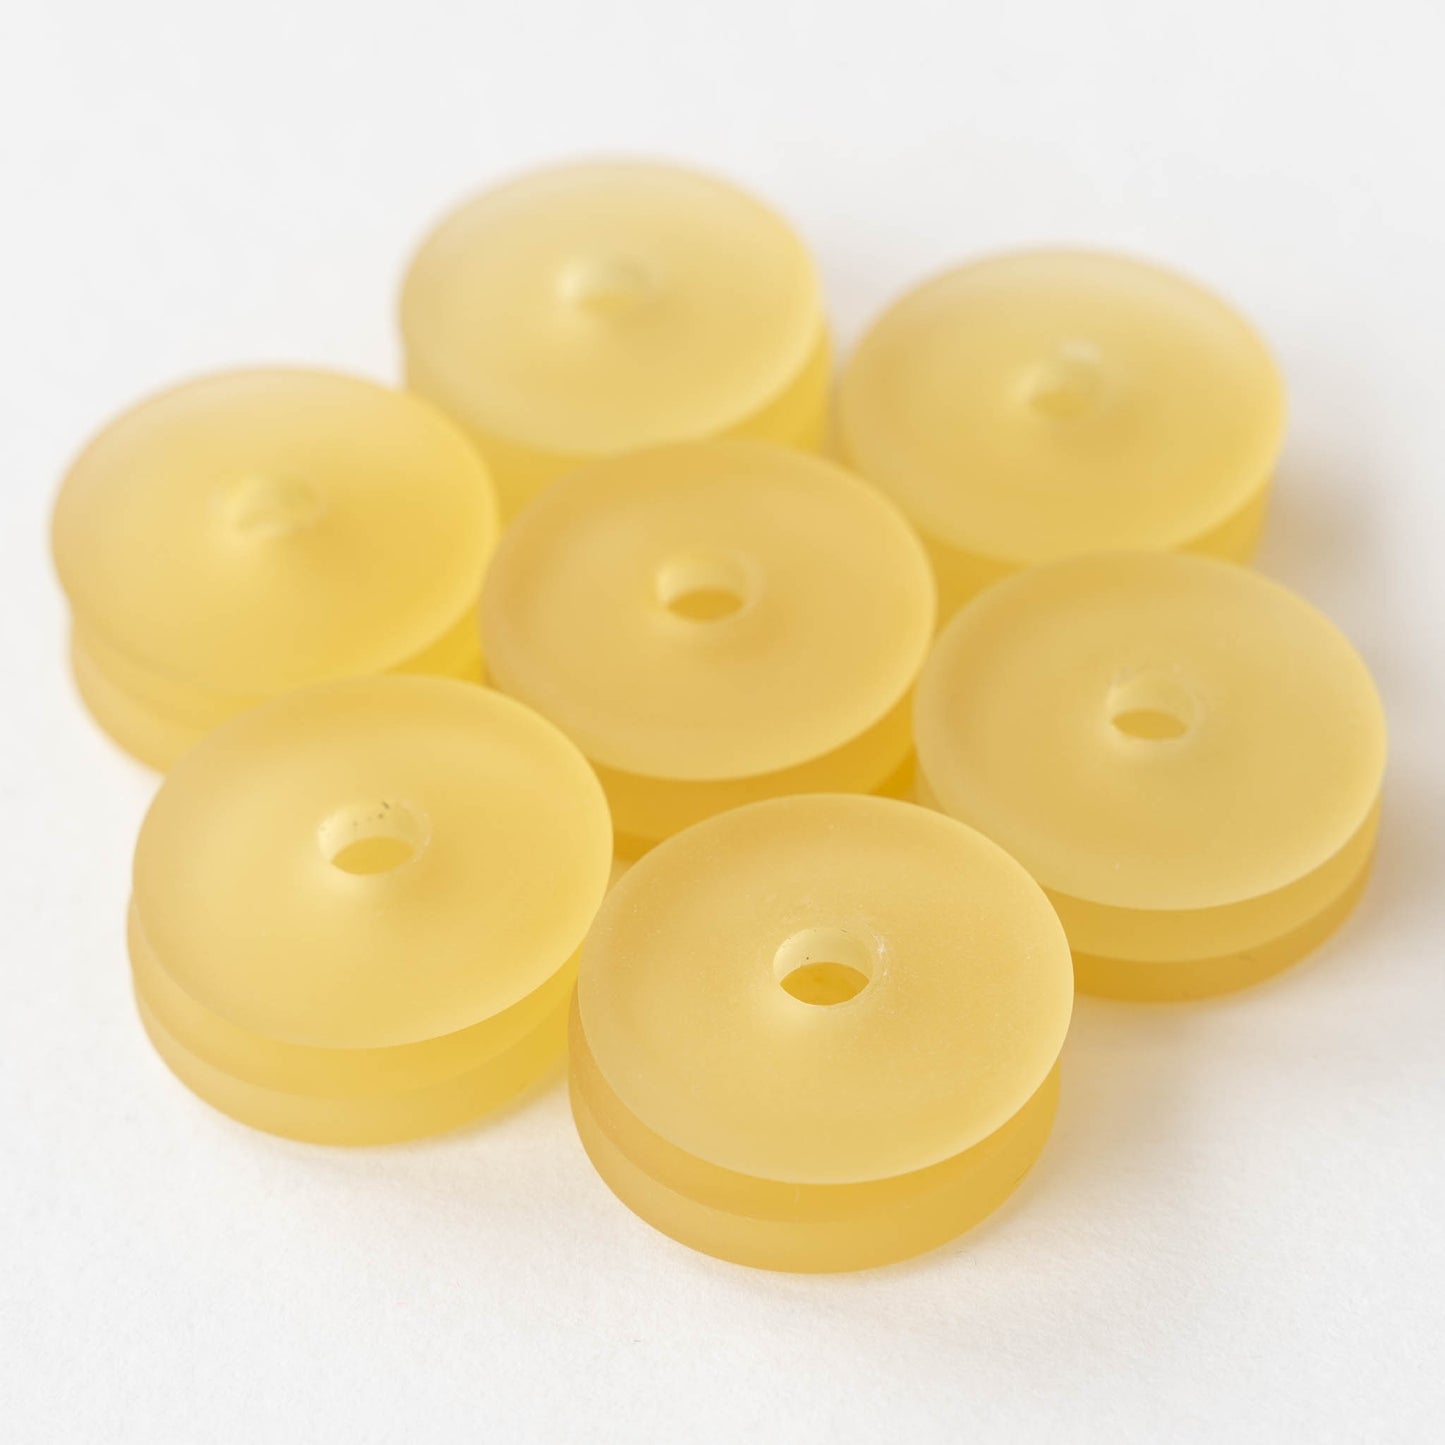 25mm Frosted Glass Donut - Mellow Yellow - 4 Beads